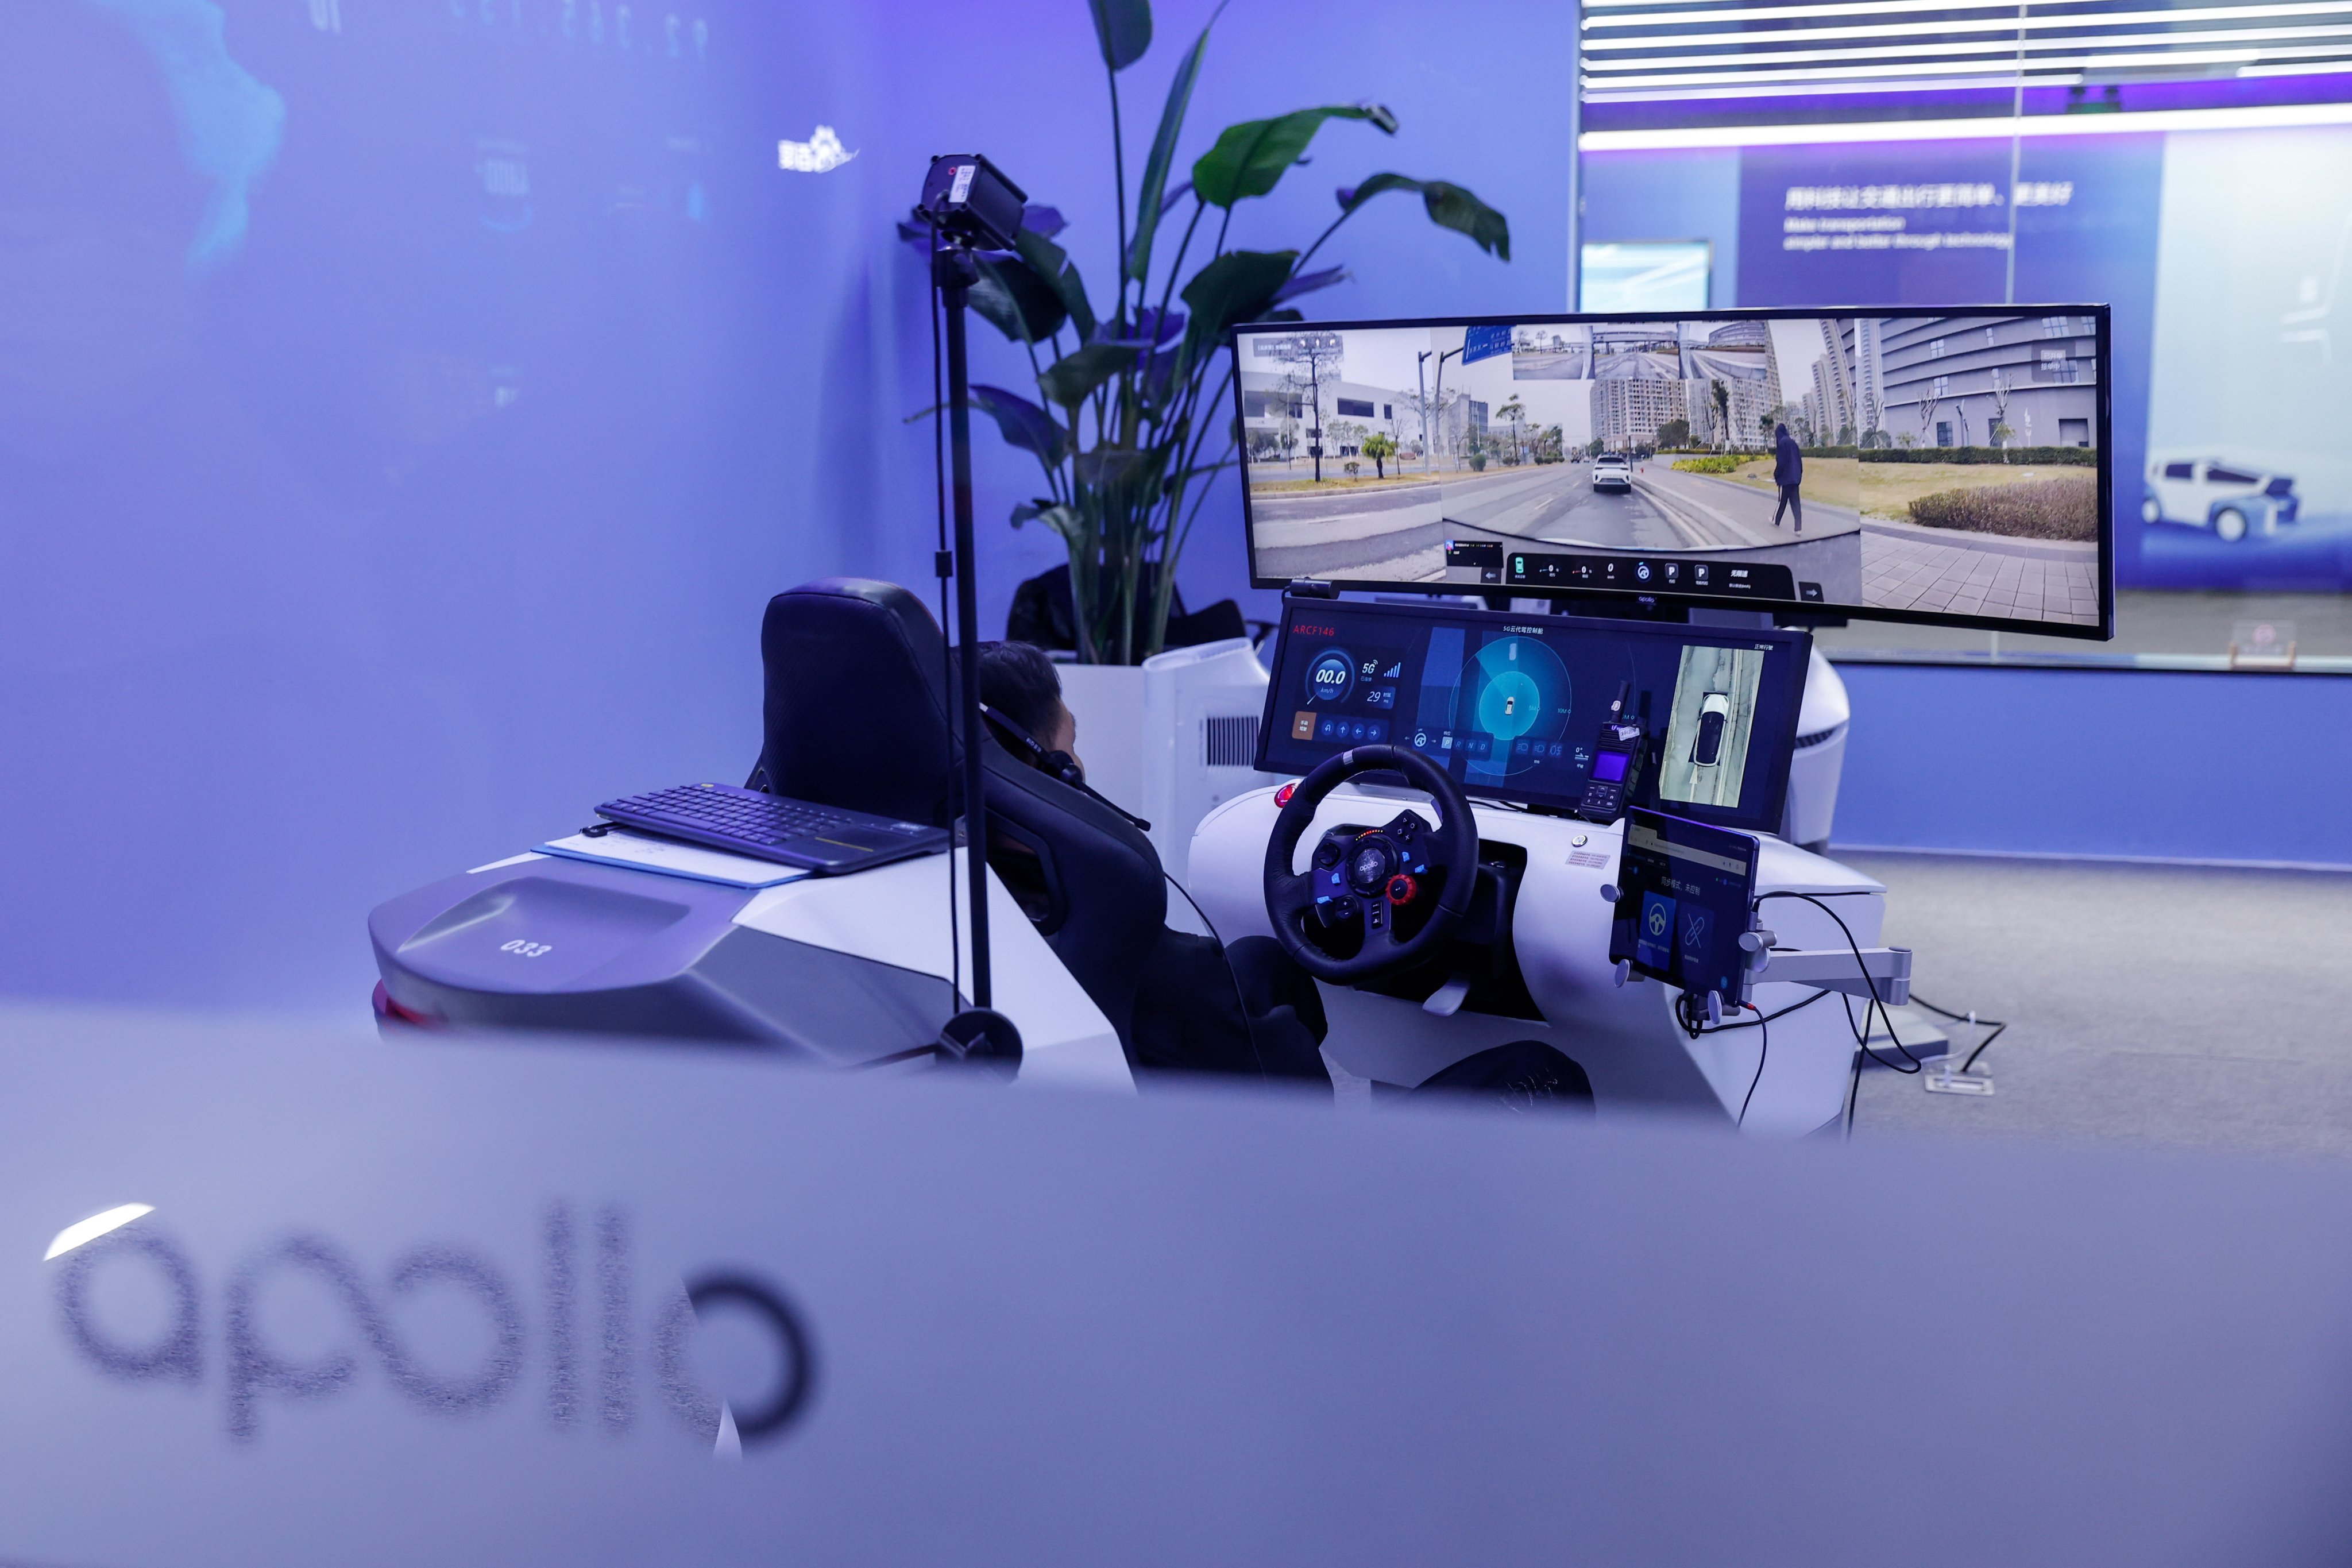 A Baidu employee works on an AI-powered driverless taxi simulator at the company’s Apollo Park centre in Beijing on January 30. Artificial intelligence is poised to make many driving jobs and those in other professions obsolete in the near future, increasing the need for governments to make the transition more equitable. Photo: EPA-EFE